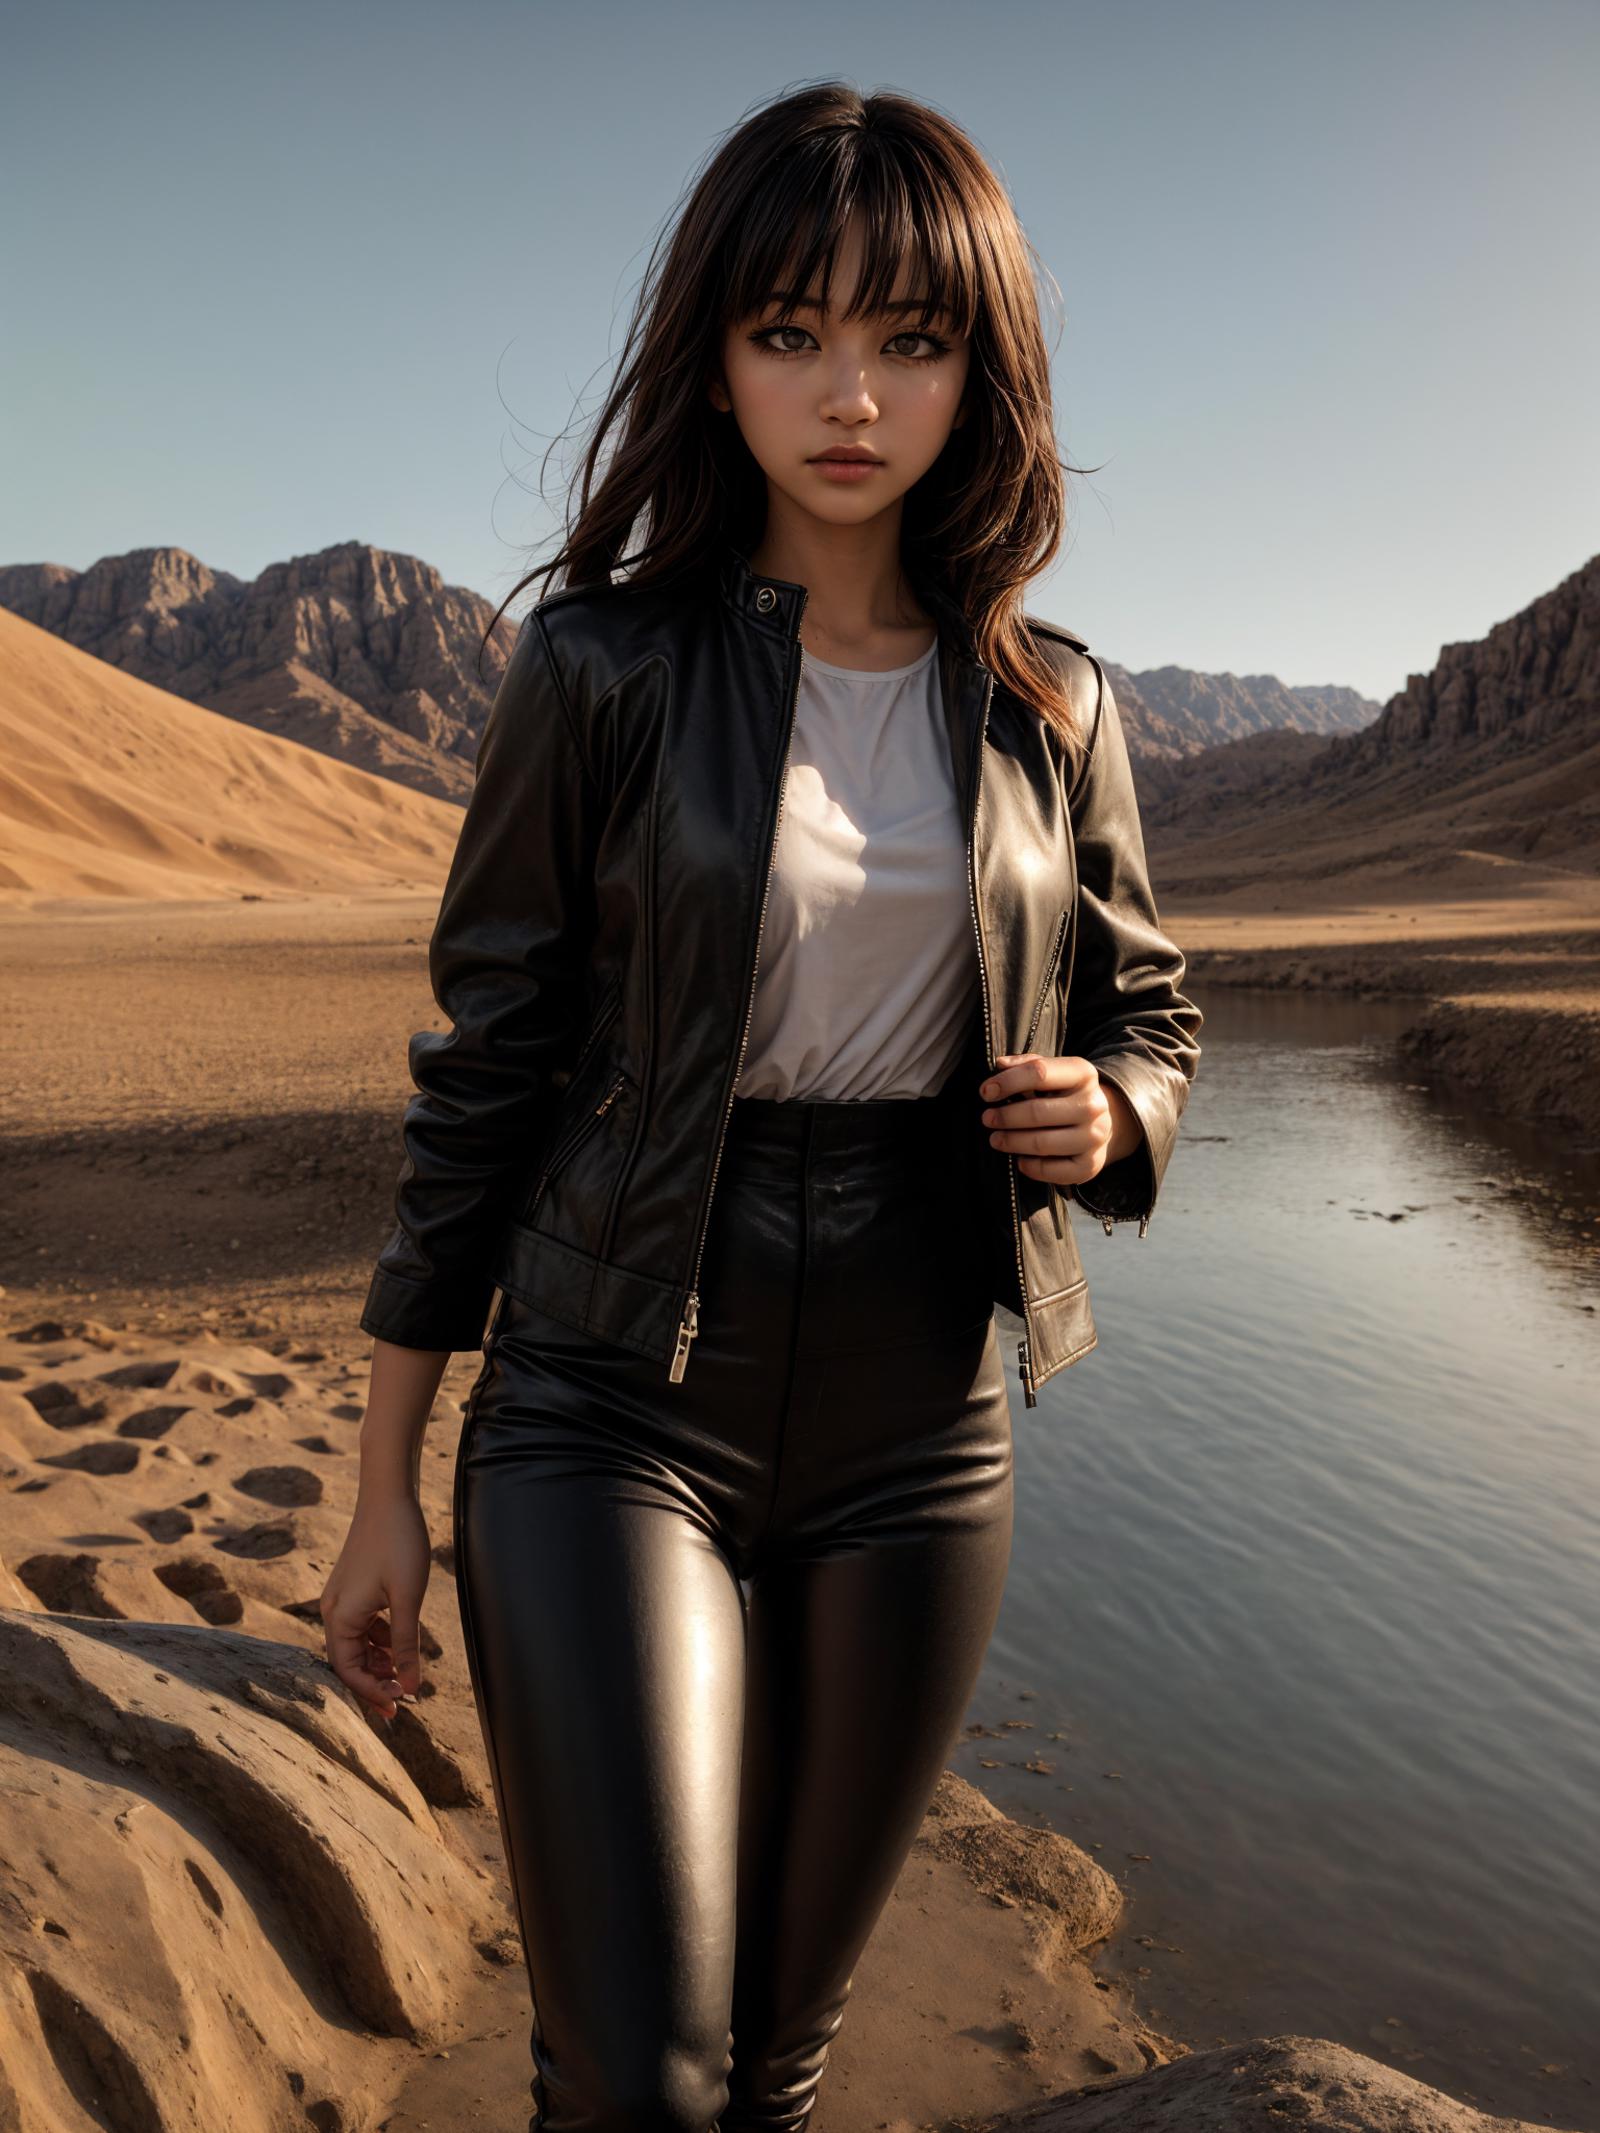 A woman in black leather pants and a white shirt standing on a rocky outcrop.